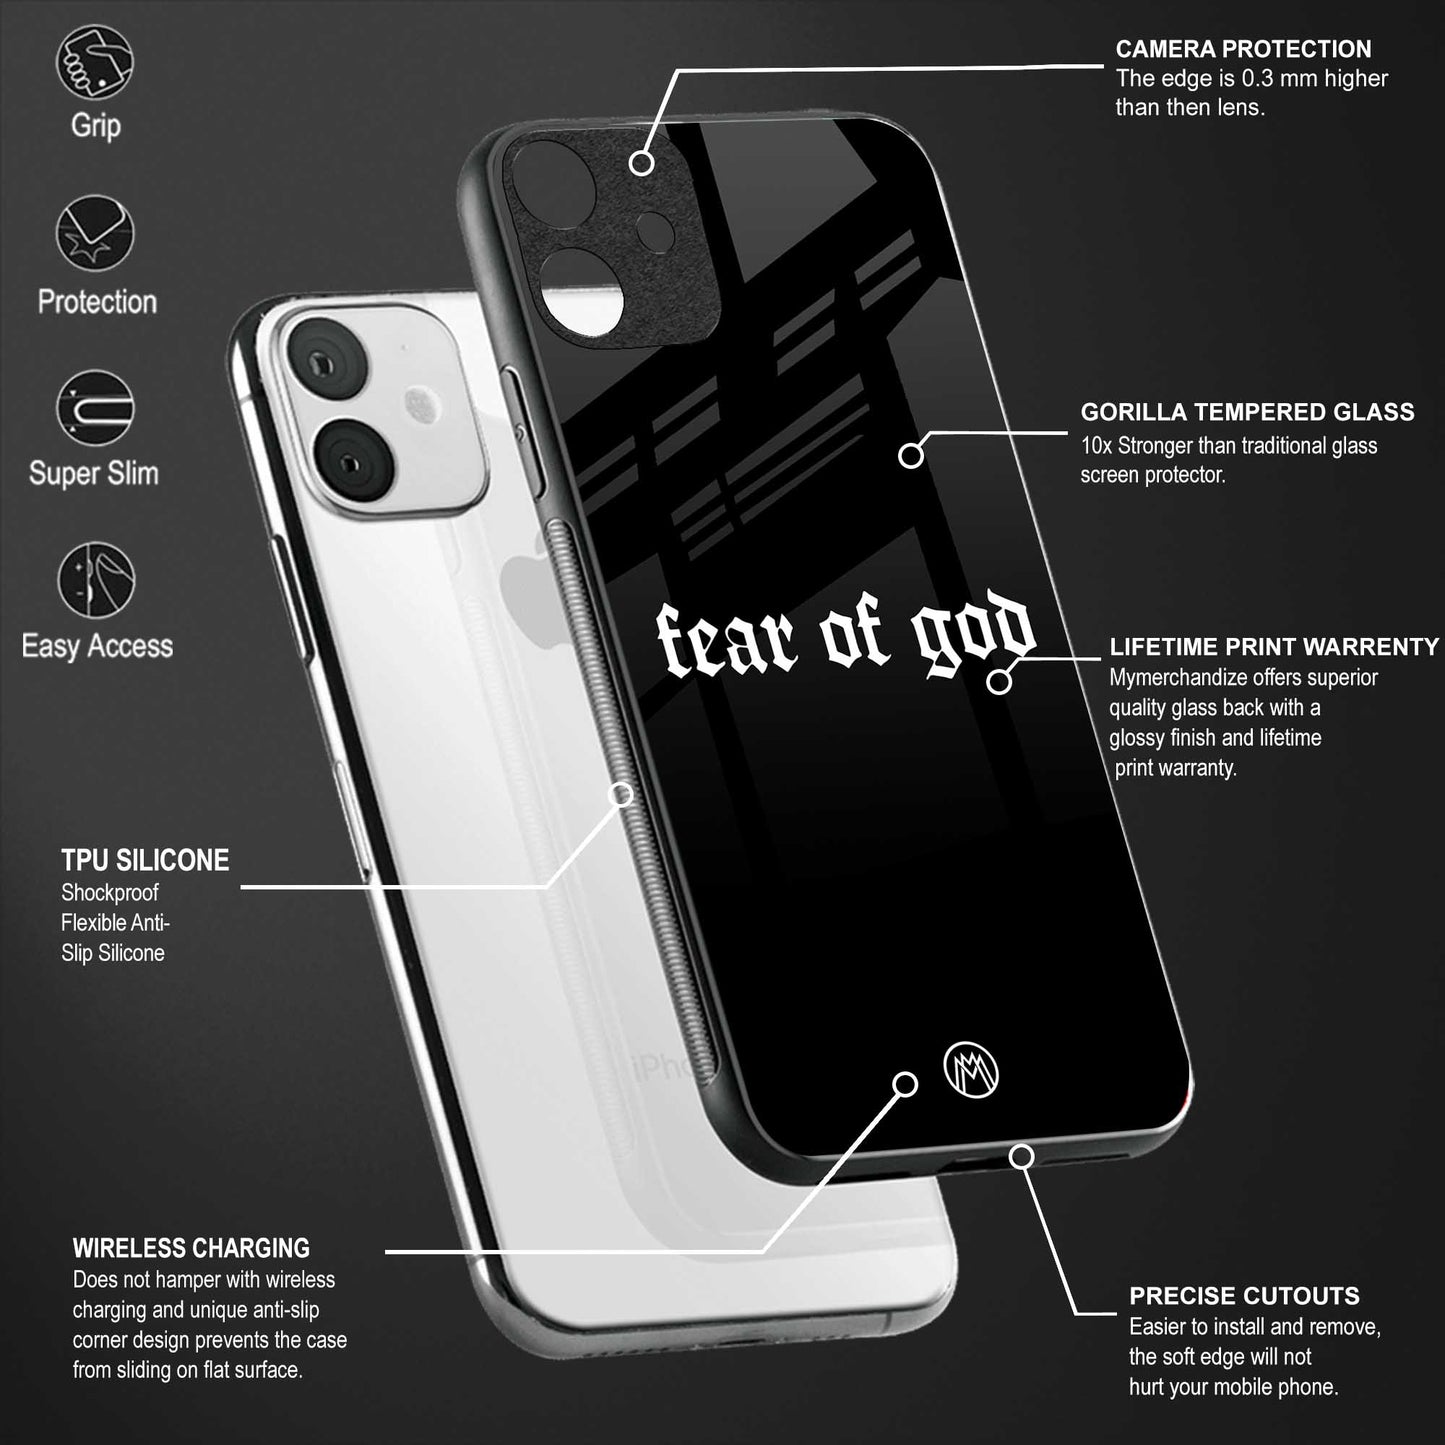 fear of god phone cover for iphone se 2020